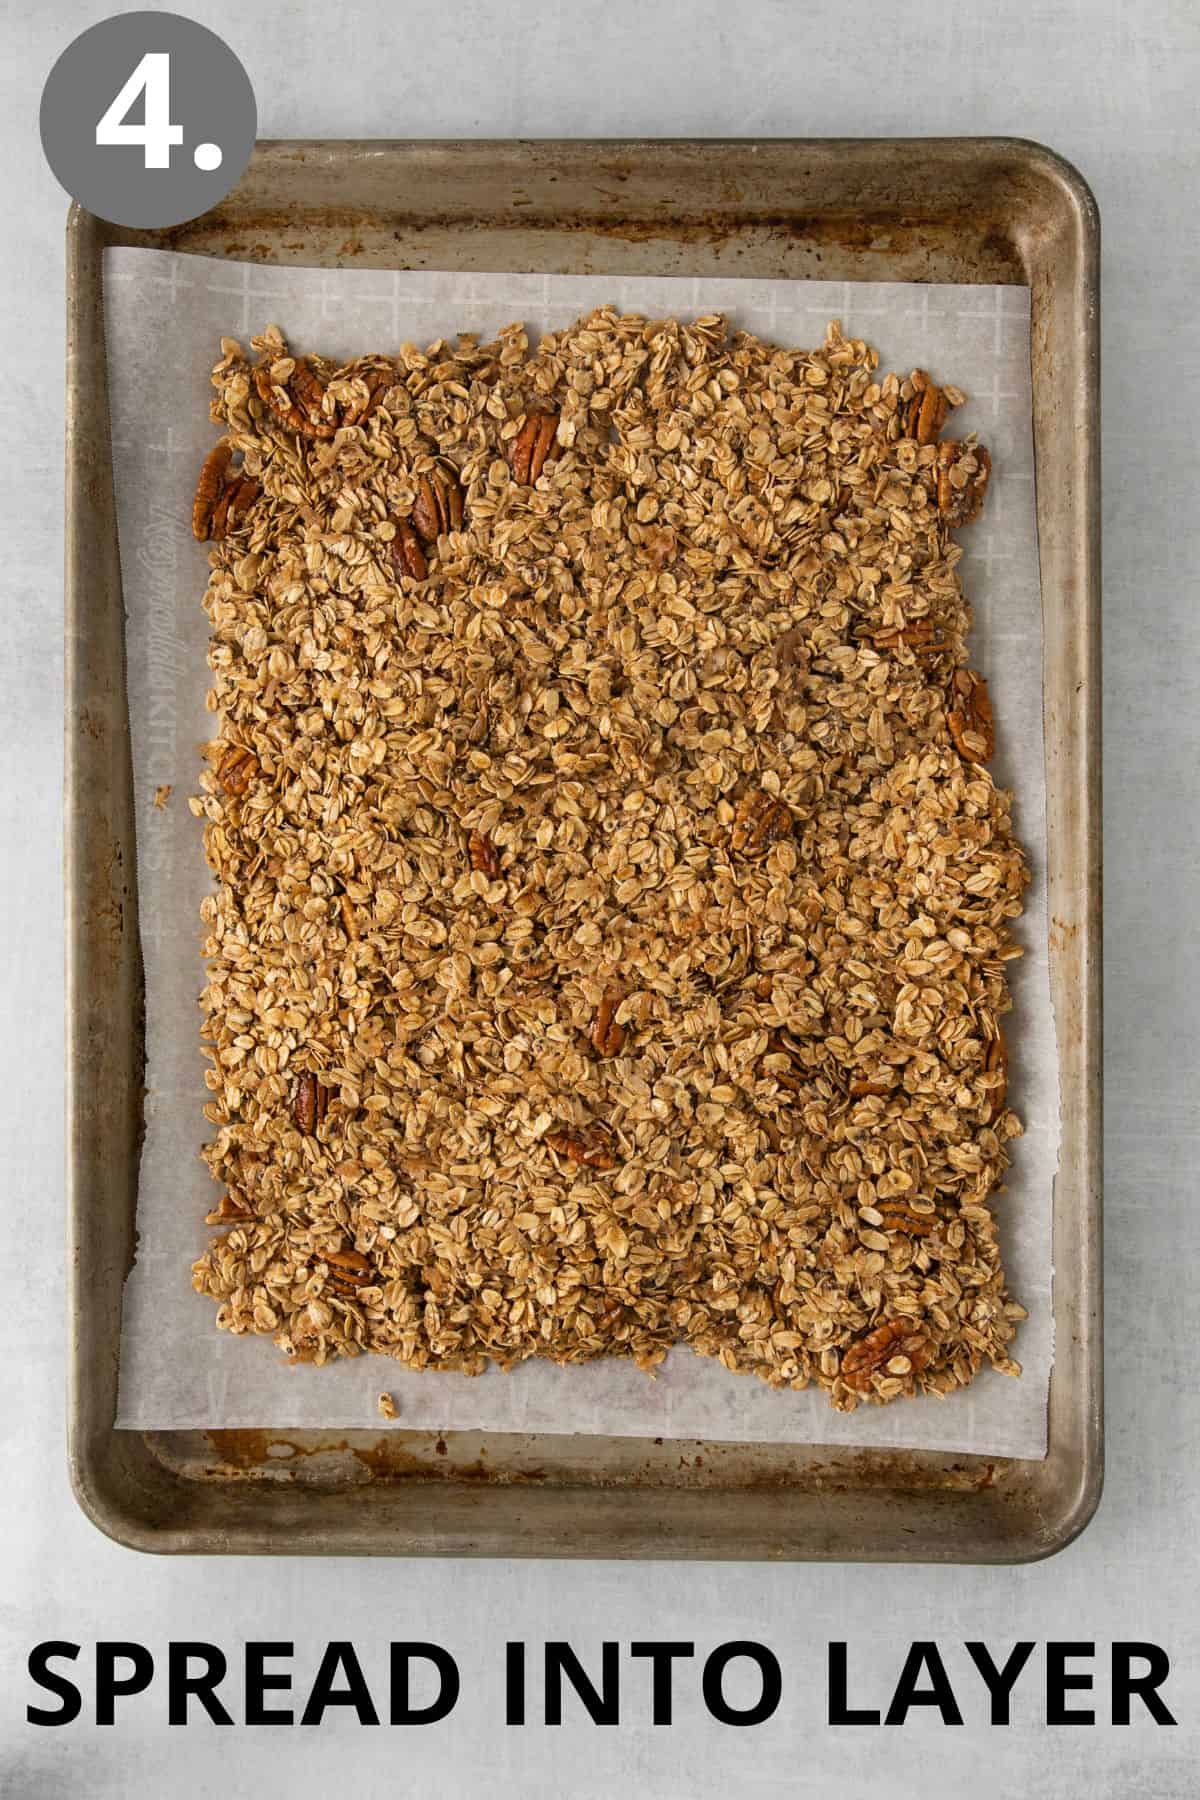 Granola spread in a layer on a baking sheet